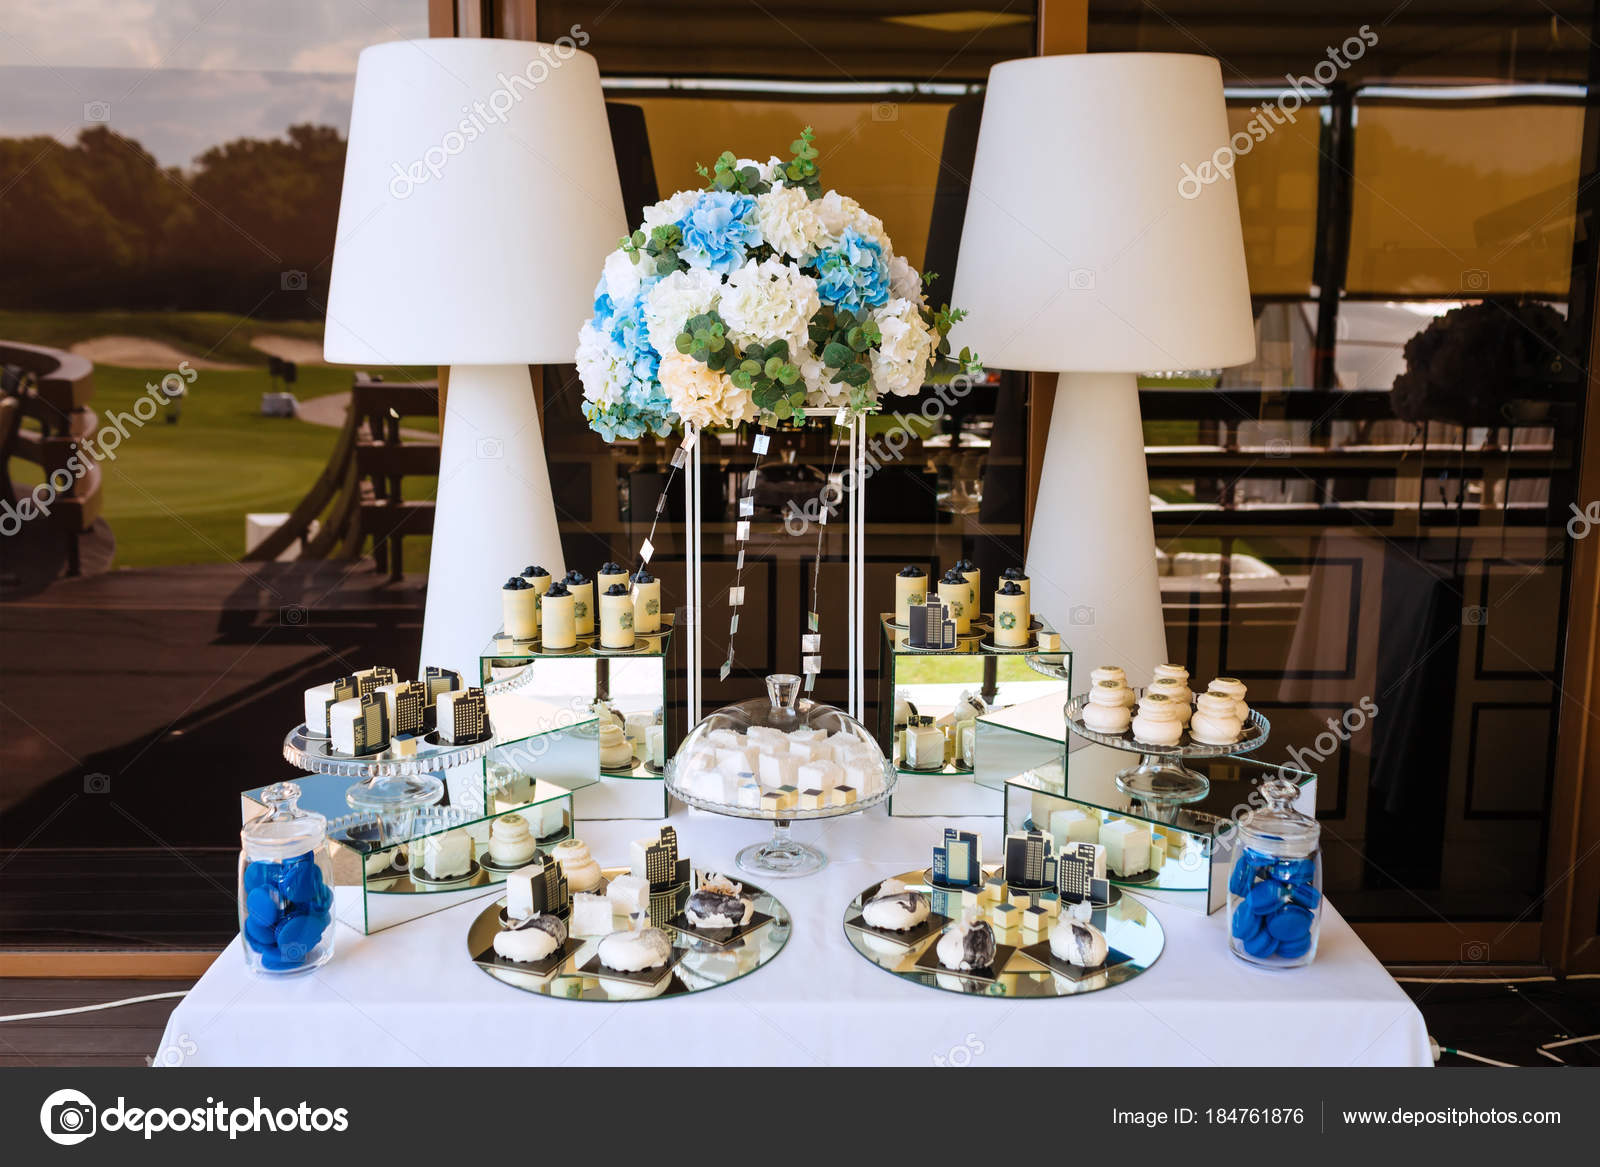 Wedding Decoration Delicious Sweets On Candy Buffet Sweet